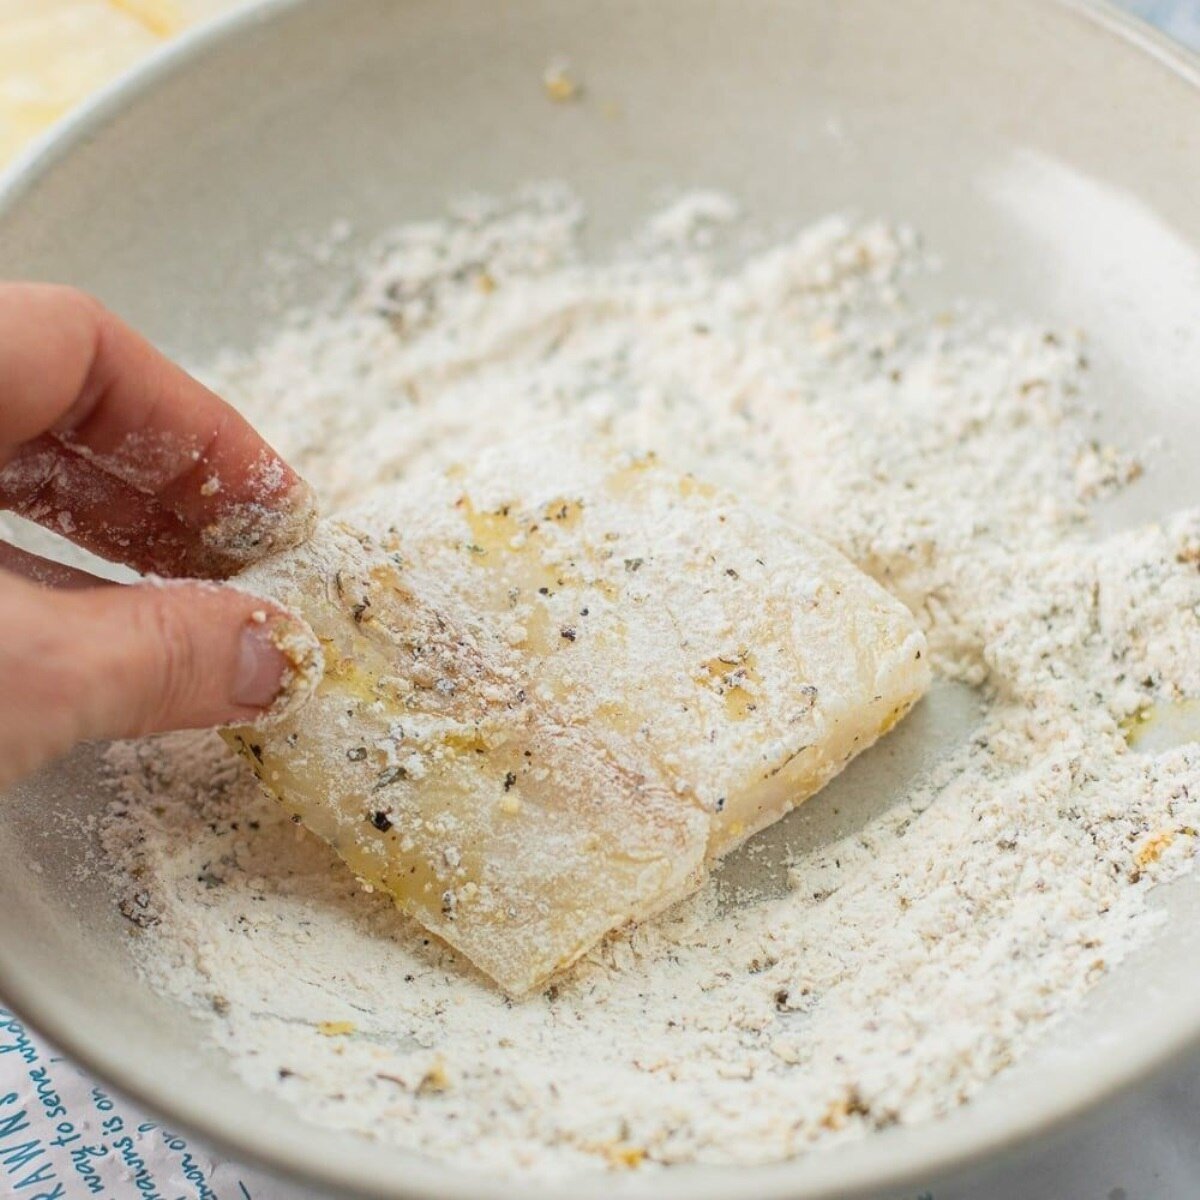 cod pieces are evenly coated with the seasoned flour